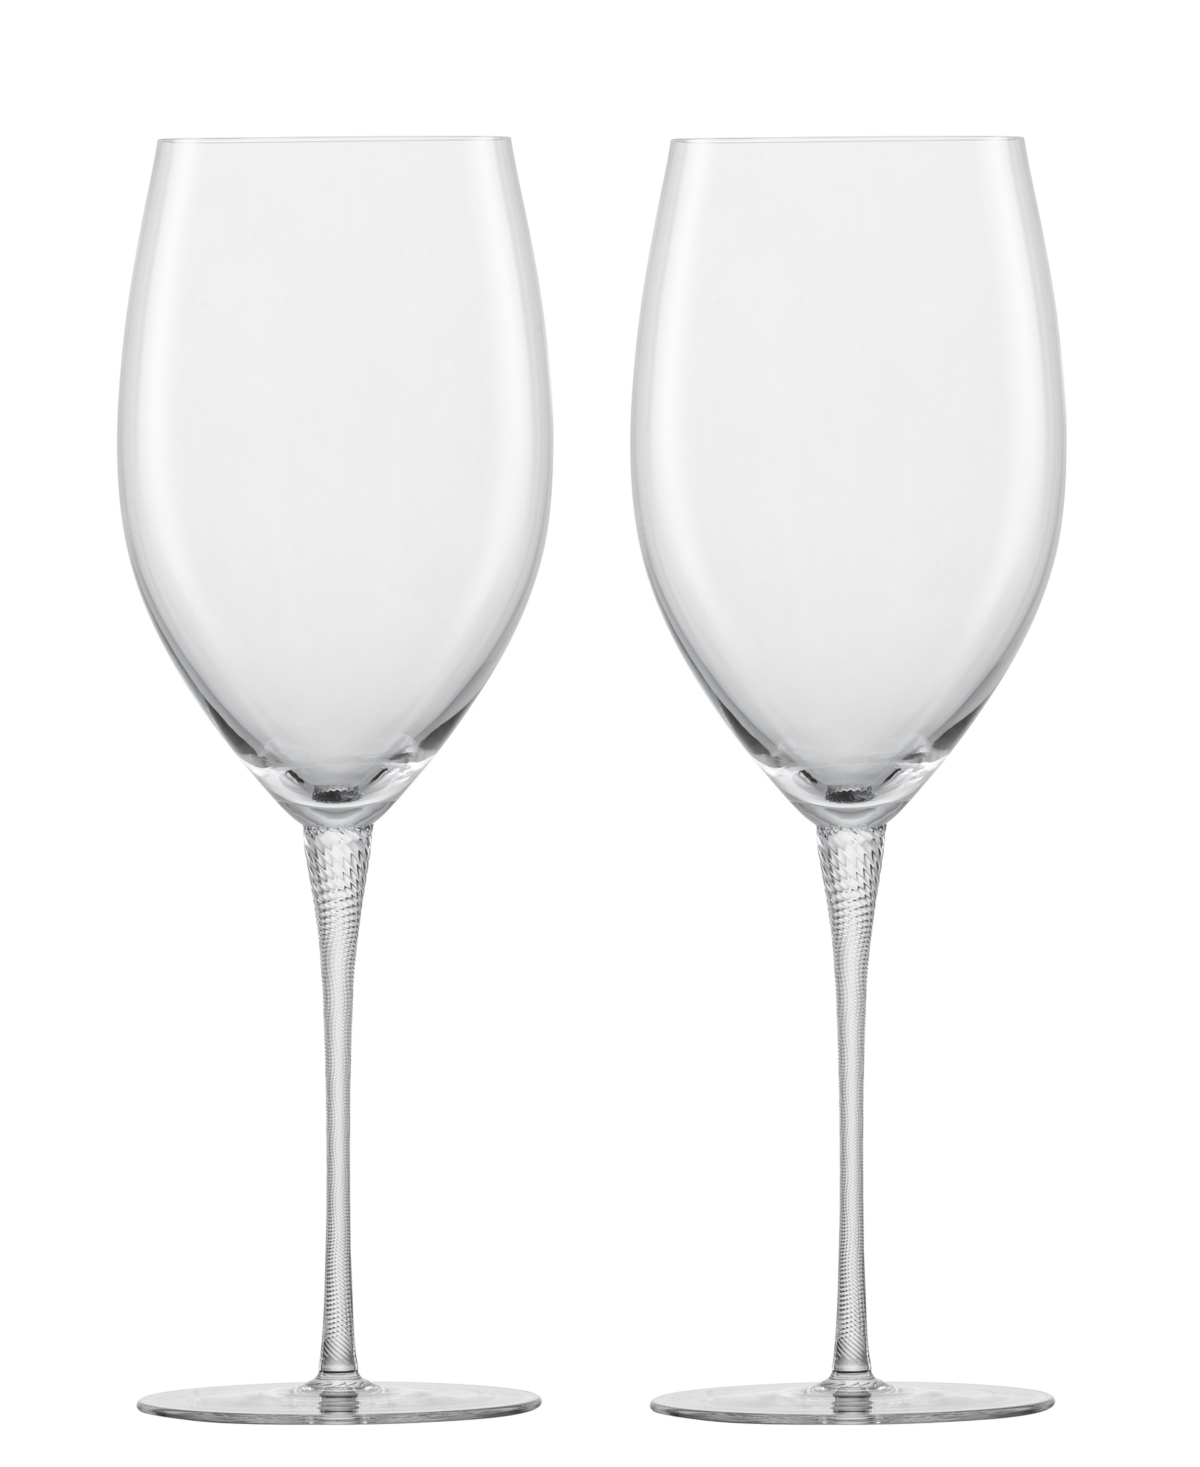 Zwiesel Glas Handmade Highness Sauvignon Blanc 10.8 Oz, Set Of 2 In Clear